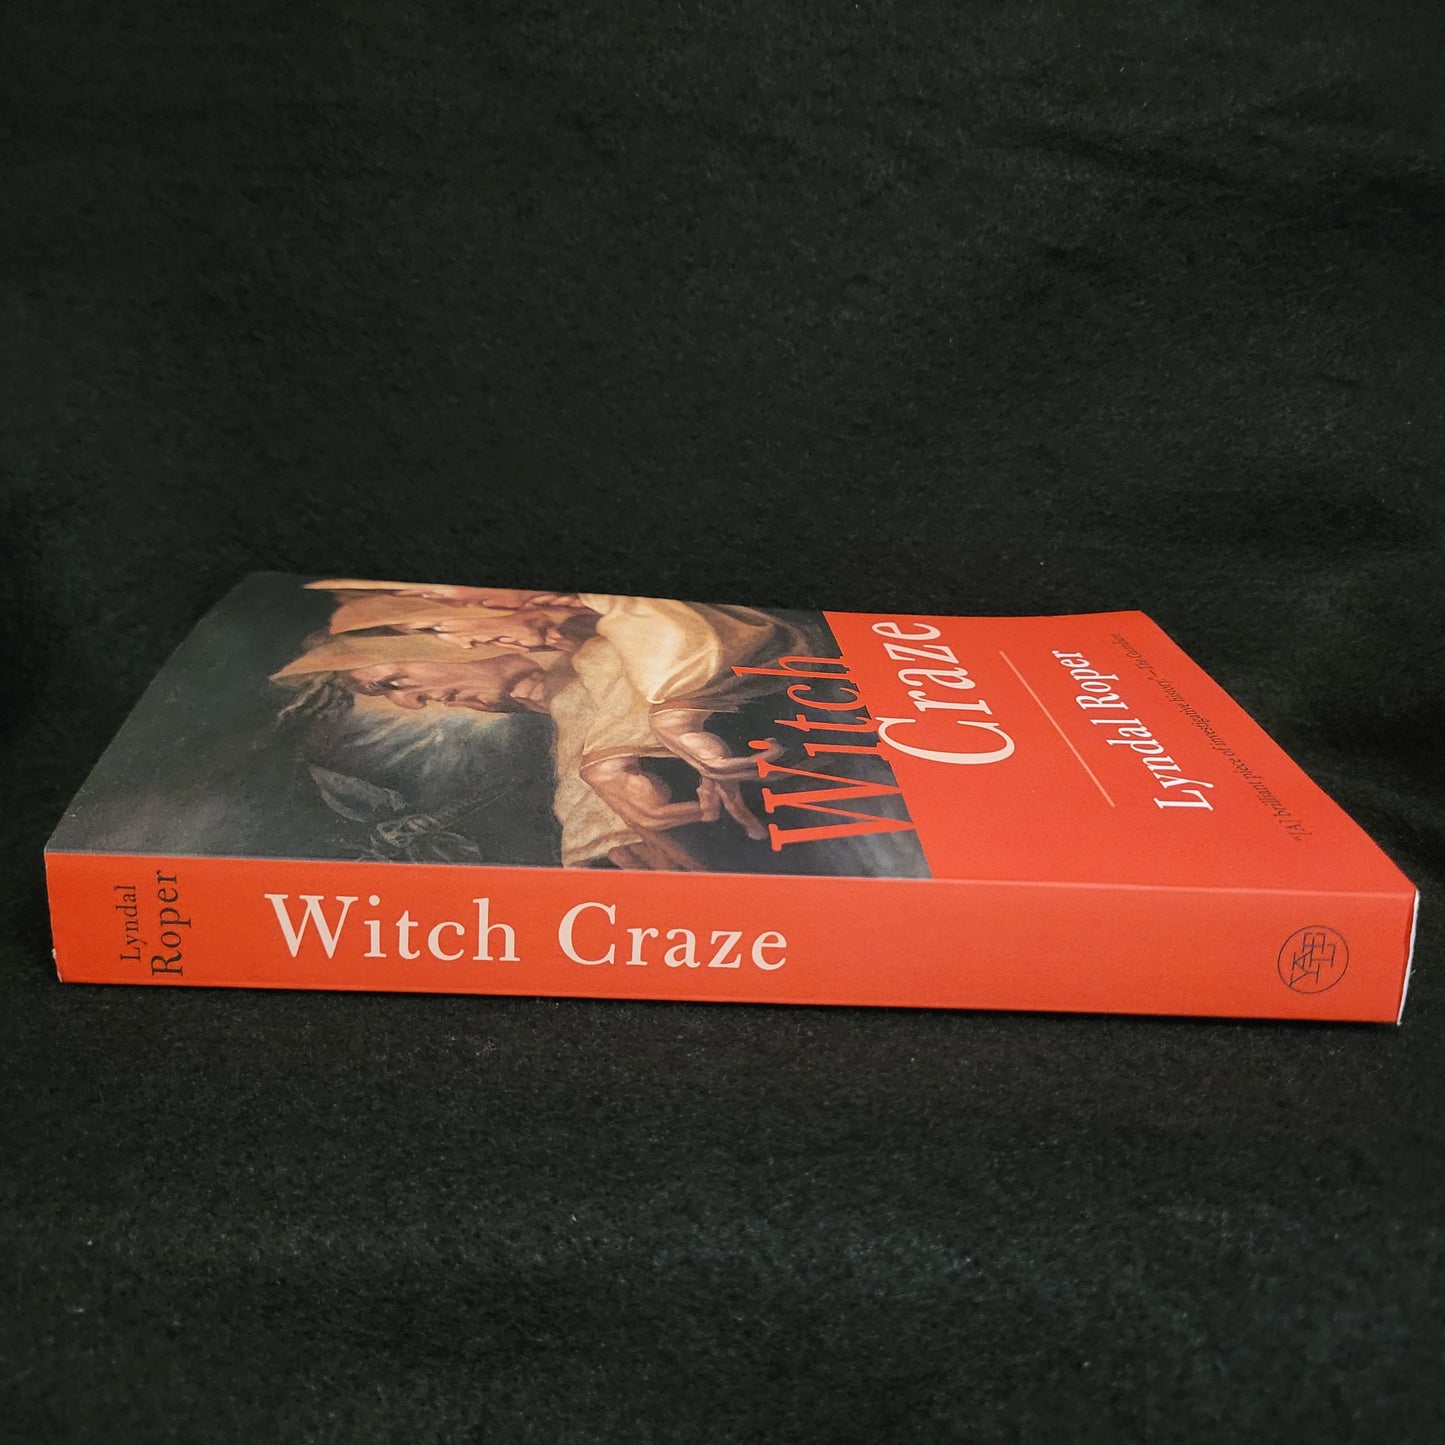 Witch Craze: Terror and Fantasy in Baroque Germany by Lyndal Roper (Yale University Press, 2004) Paperback